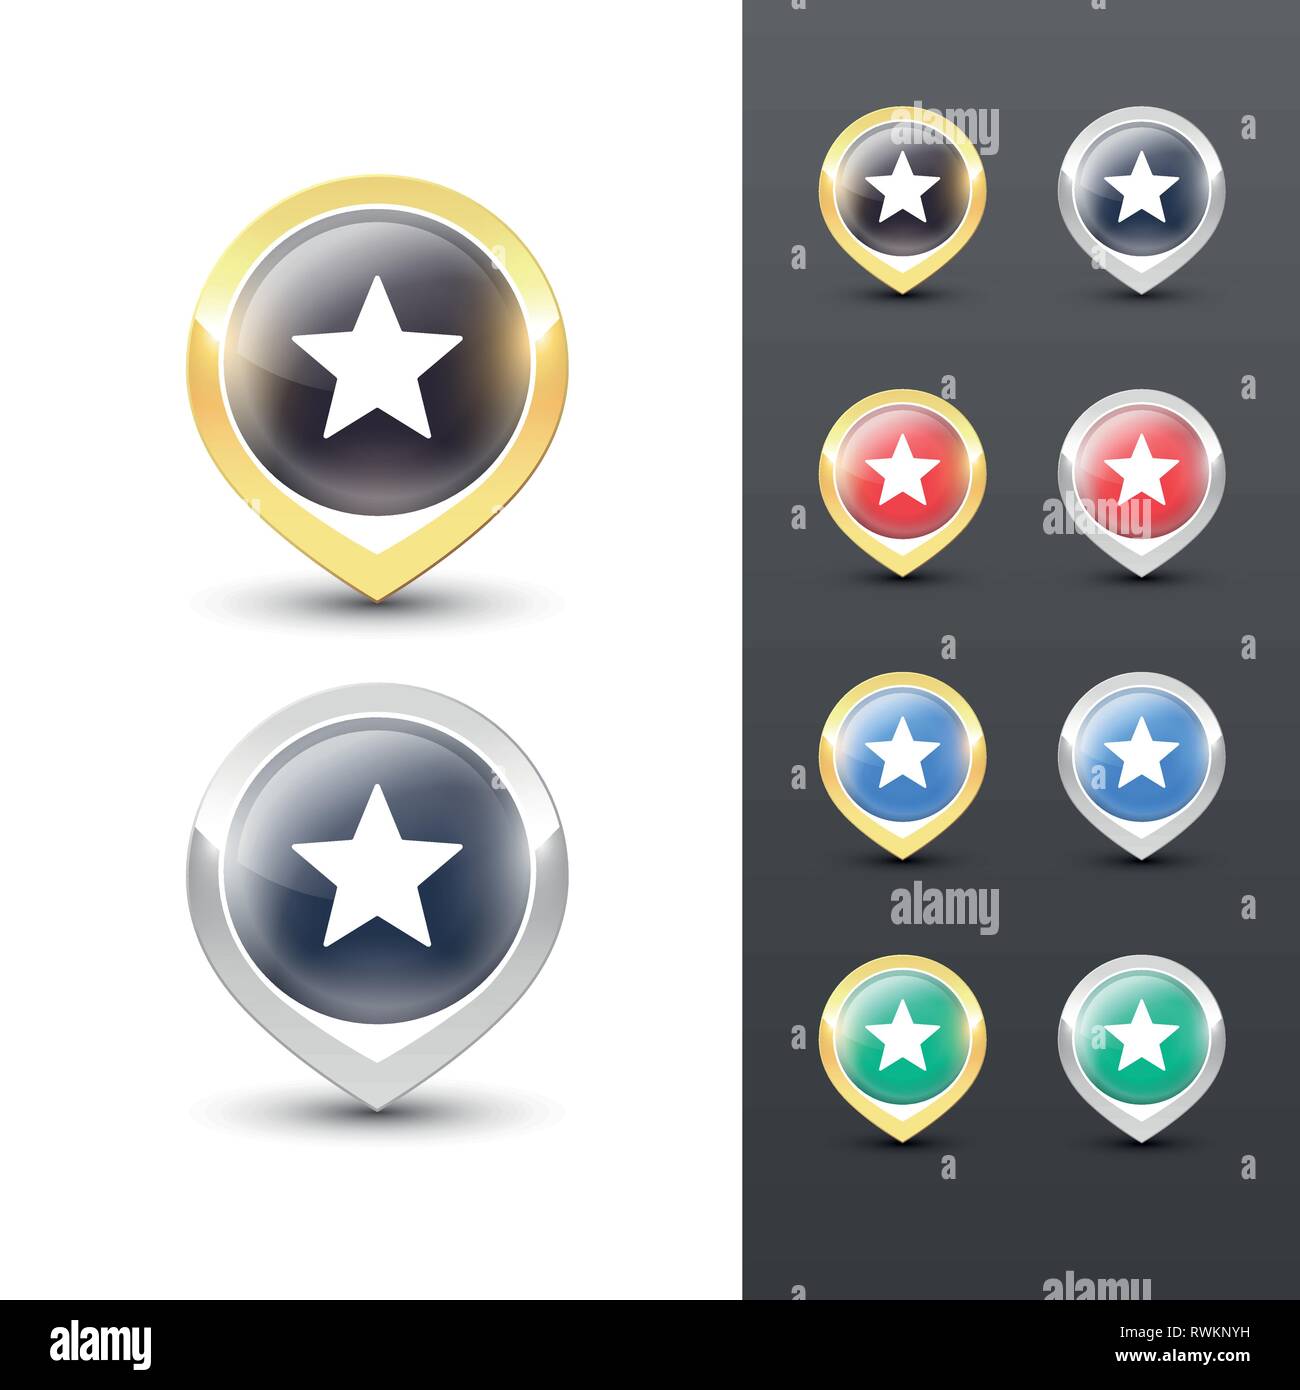 Pointer icons with metallic gold and silver border, a star symbol inside. Vector location pins isolated on white background. Stock Vector